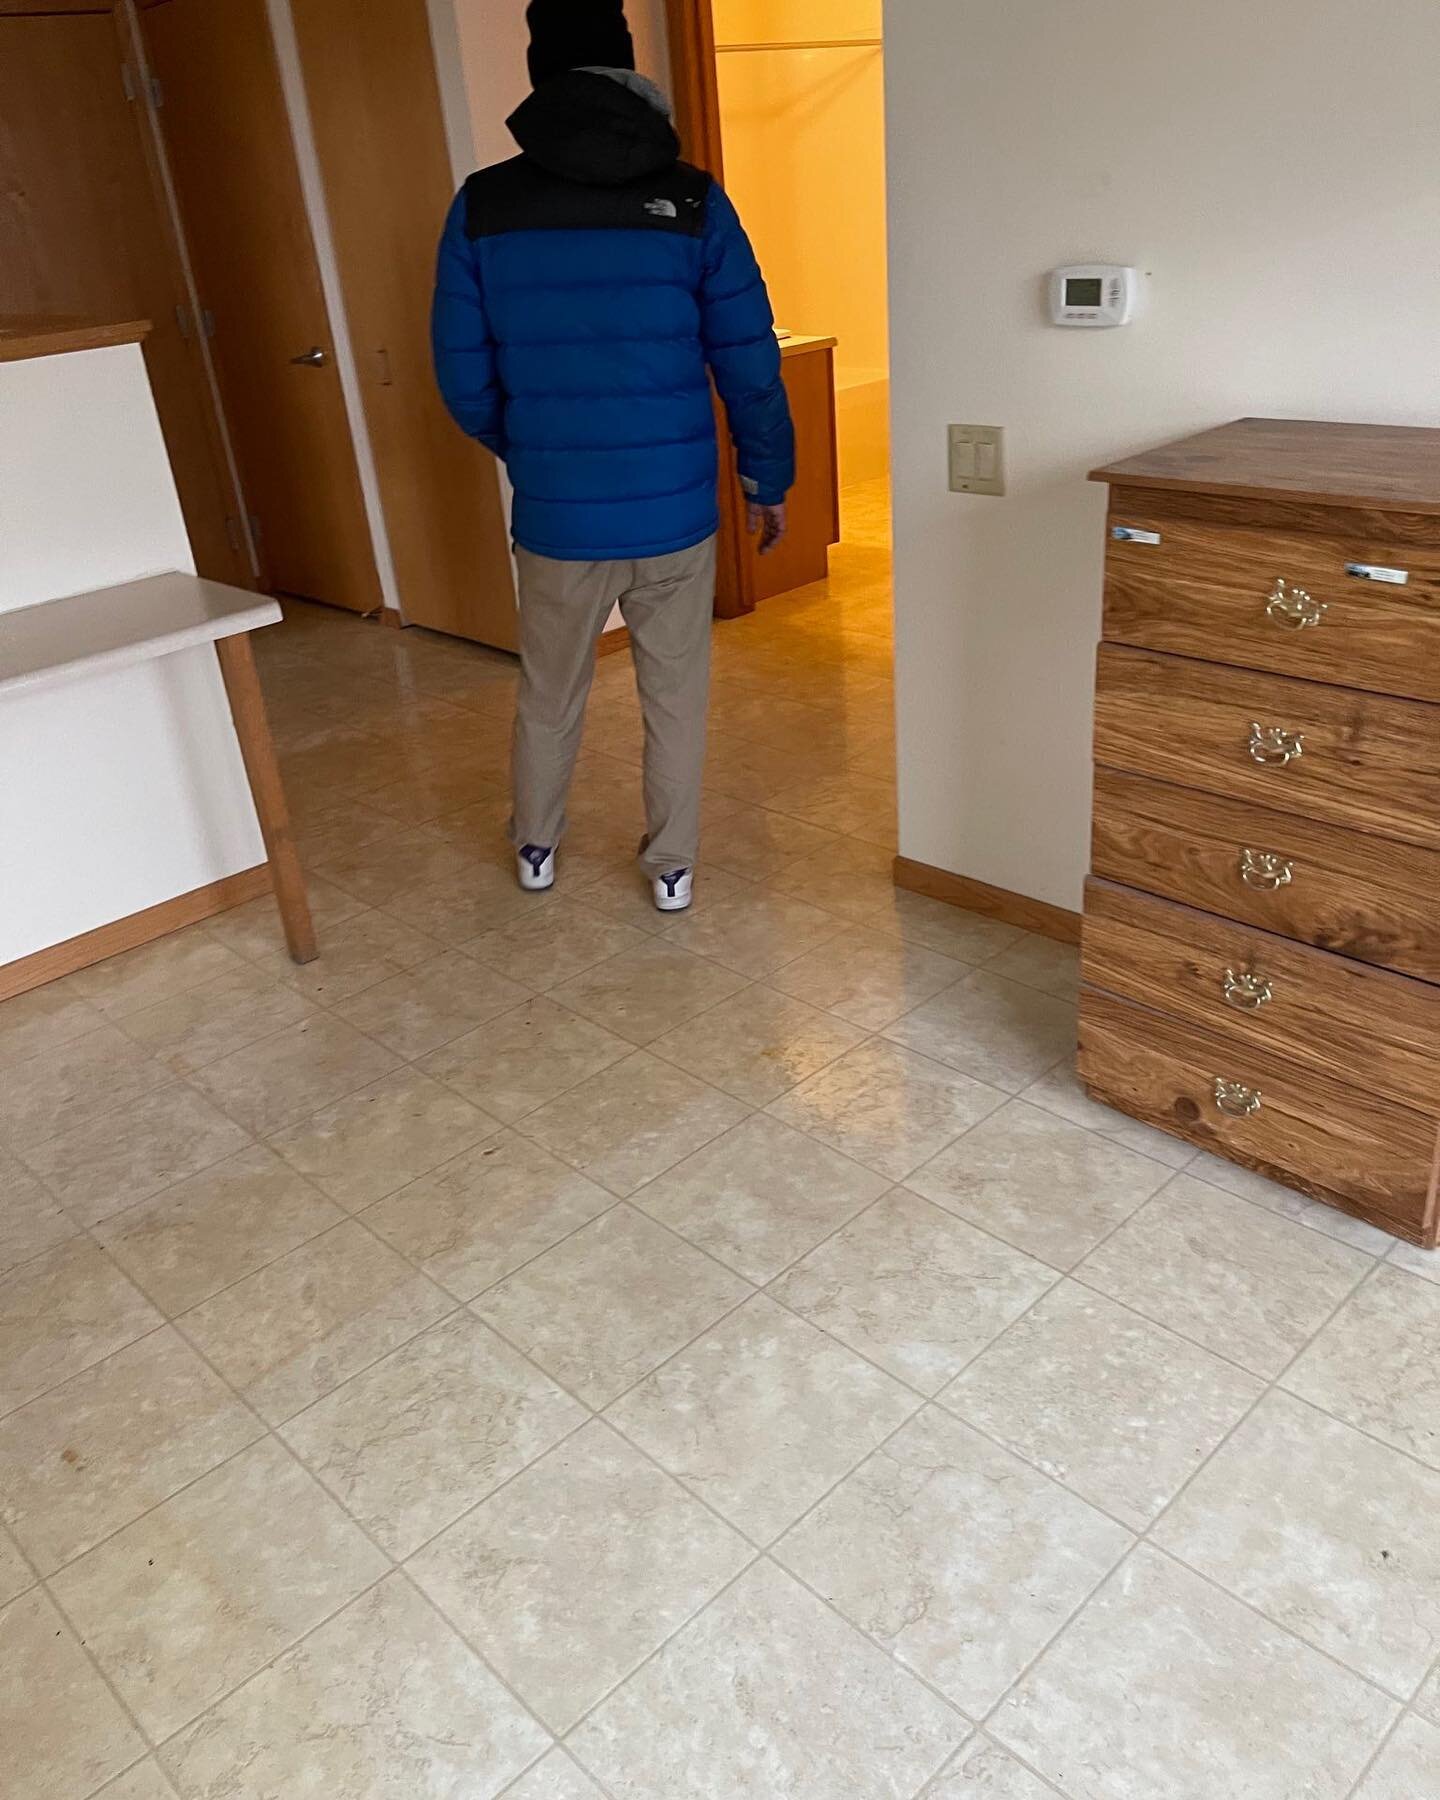 Feel Good Friday - End of the Year addition! Here is another person we helped this week. It was more then finding an apartment, filling out paperwork, or helping with the security deposit (Thanks Beacon). It is the connections created in the communit